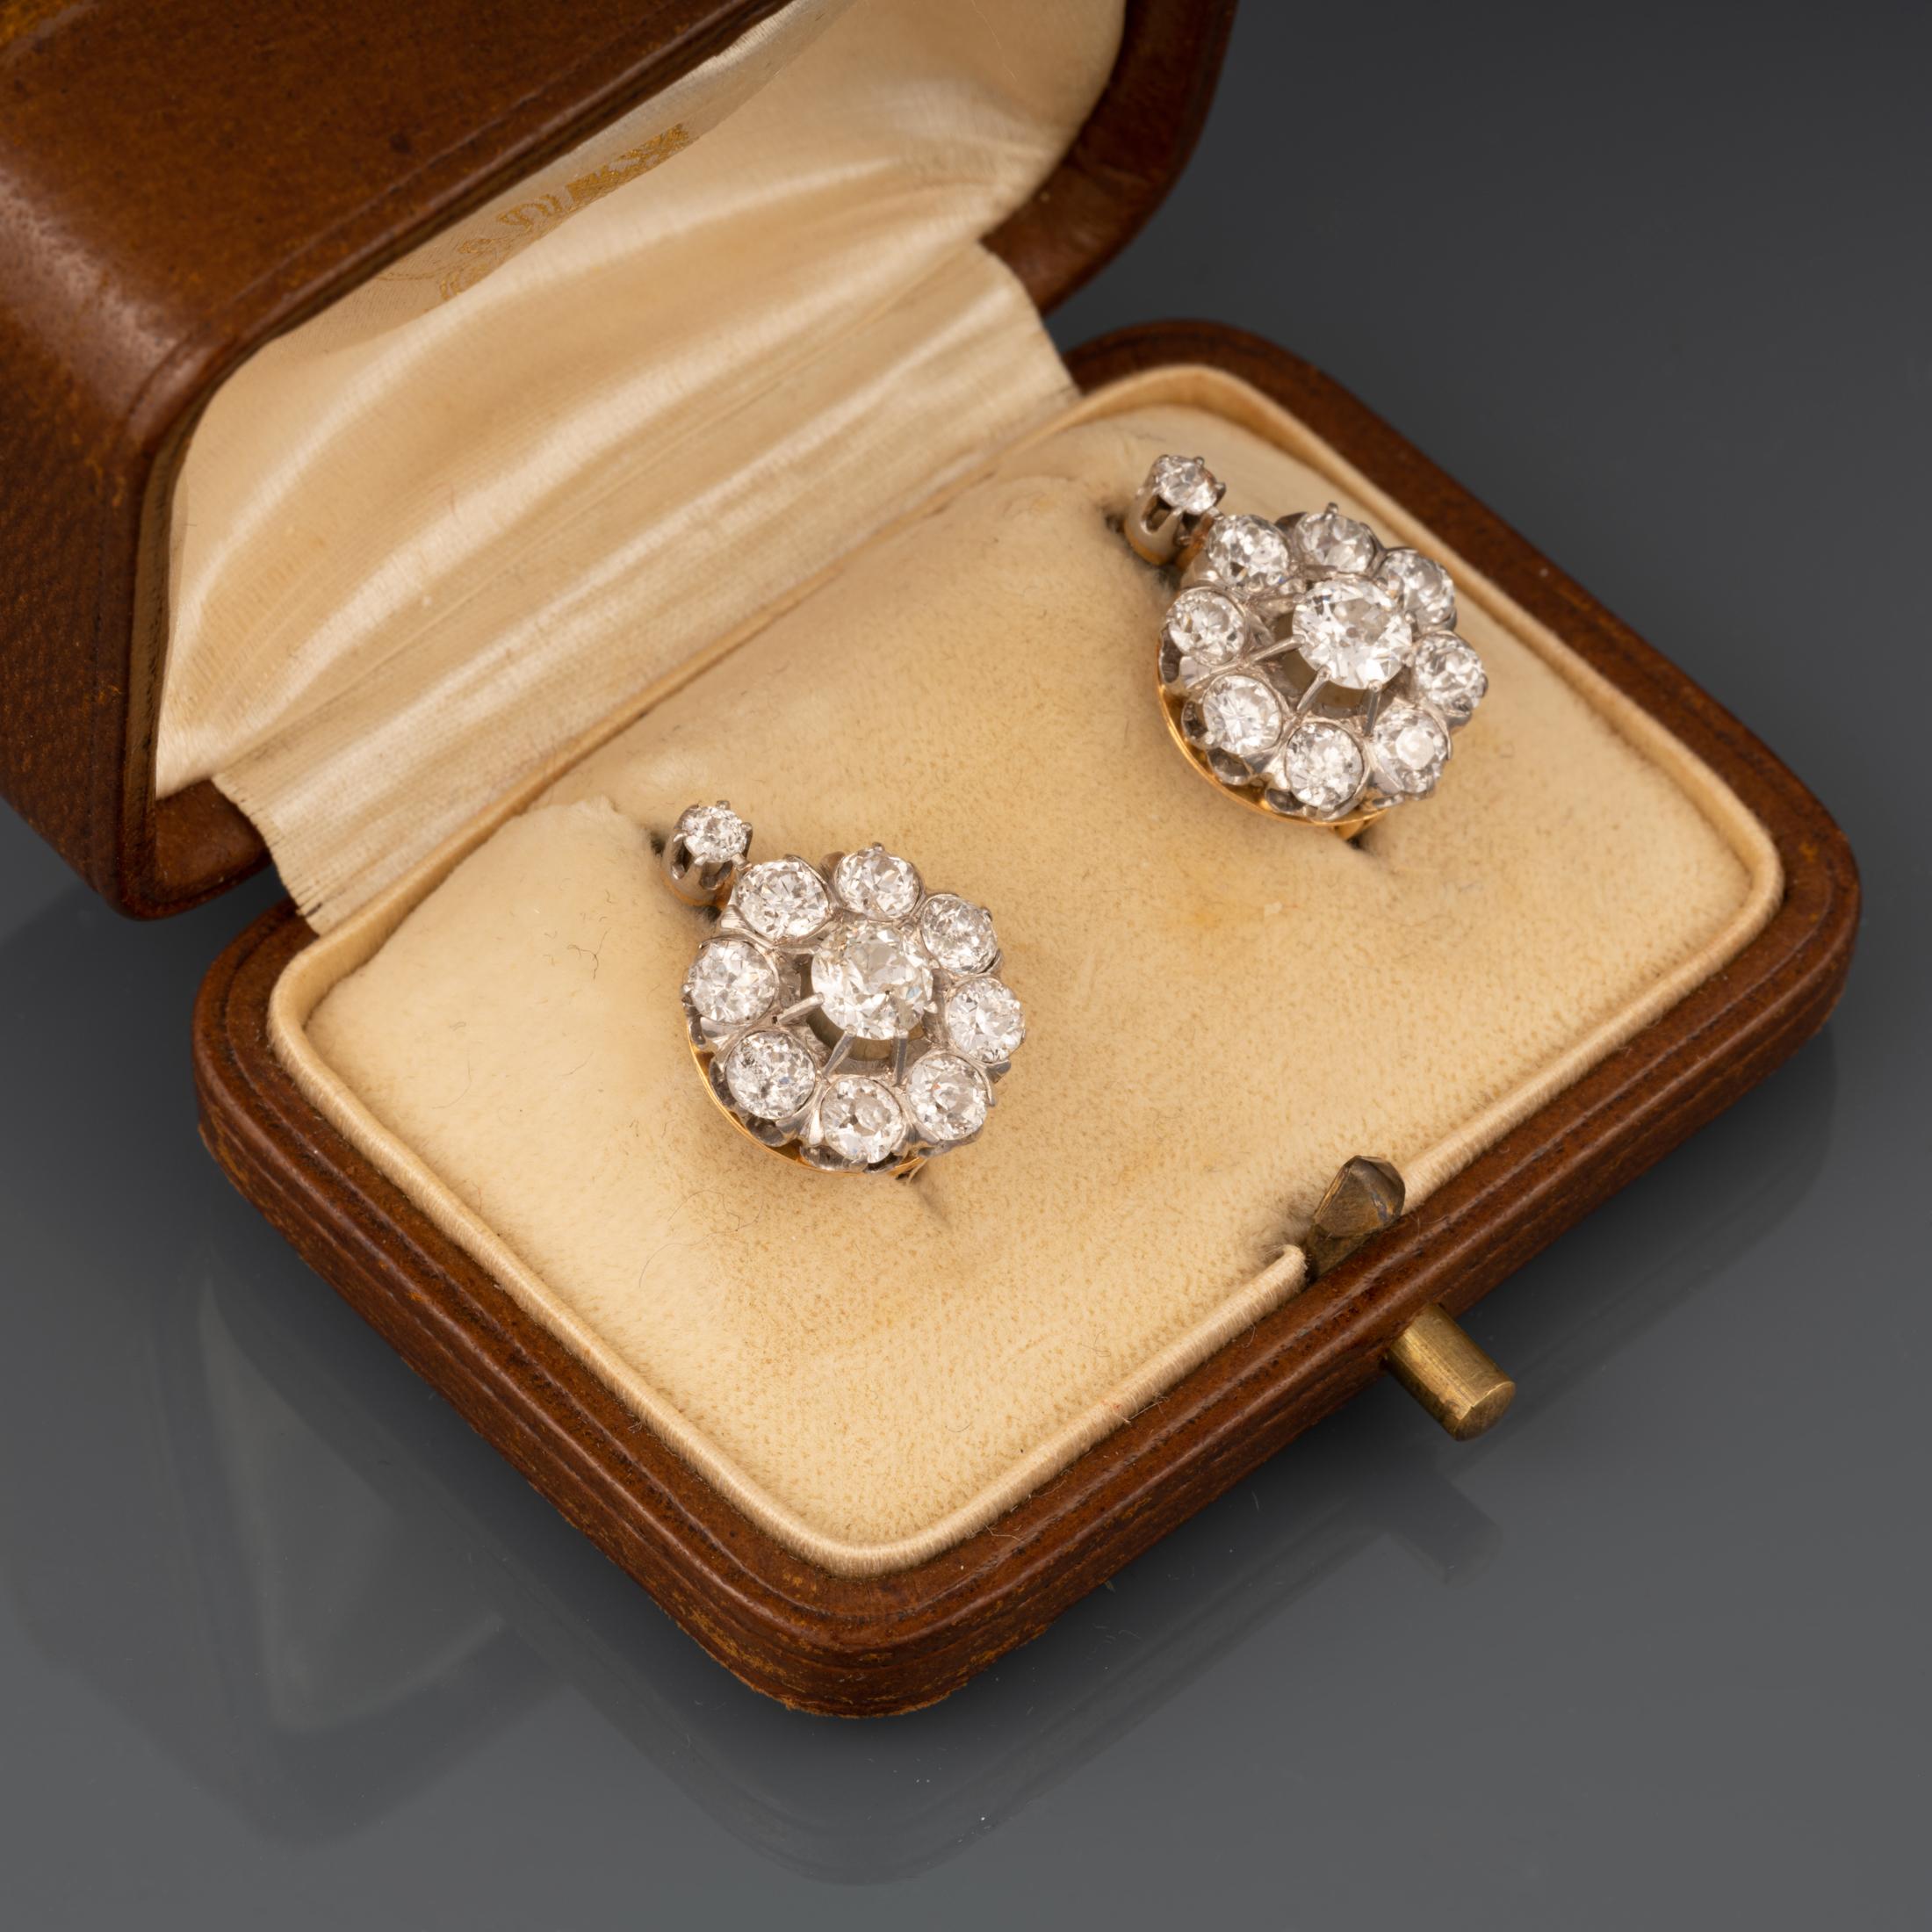 Old European Cut 3 Carats Diamonds French Antique Earrings For Sale